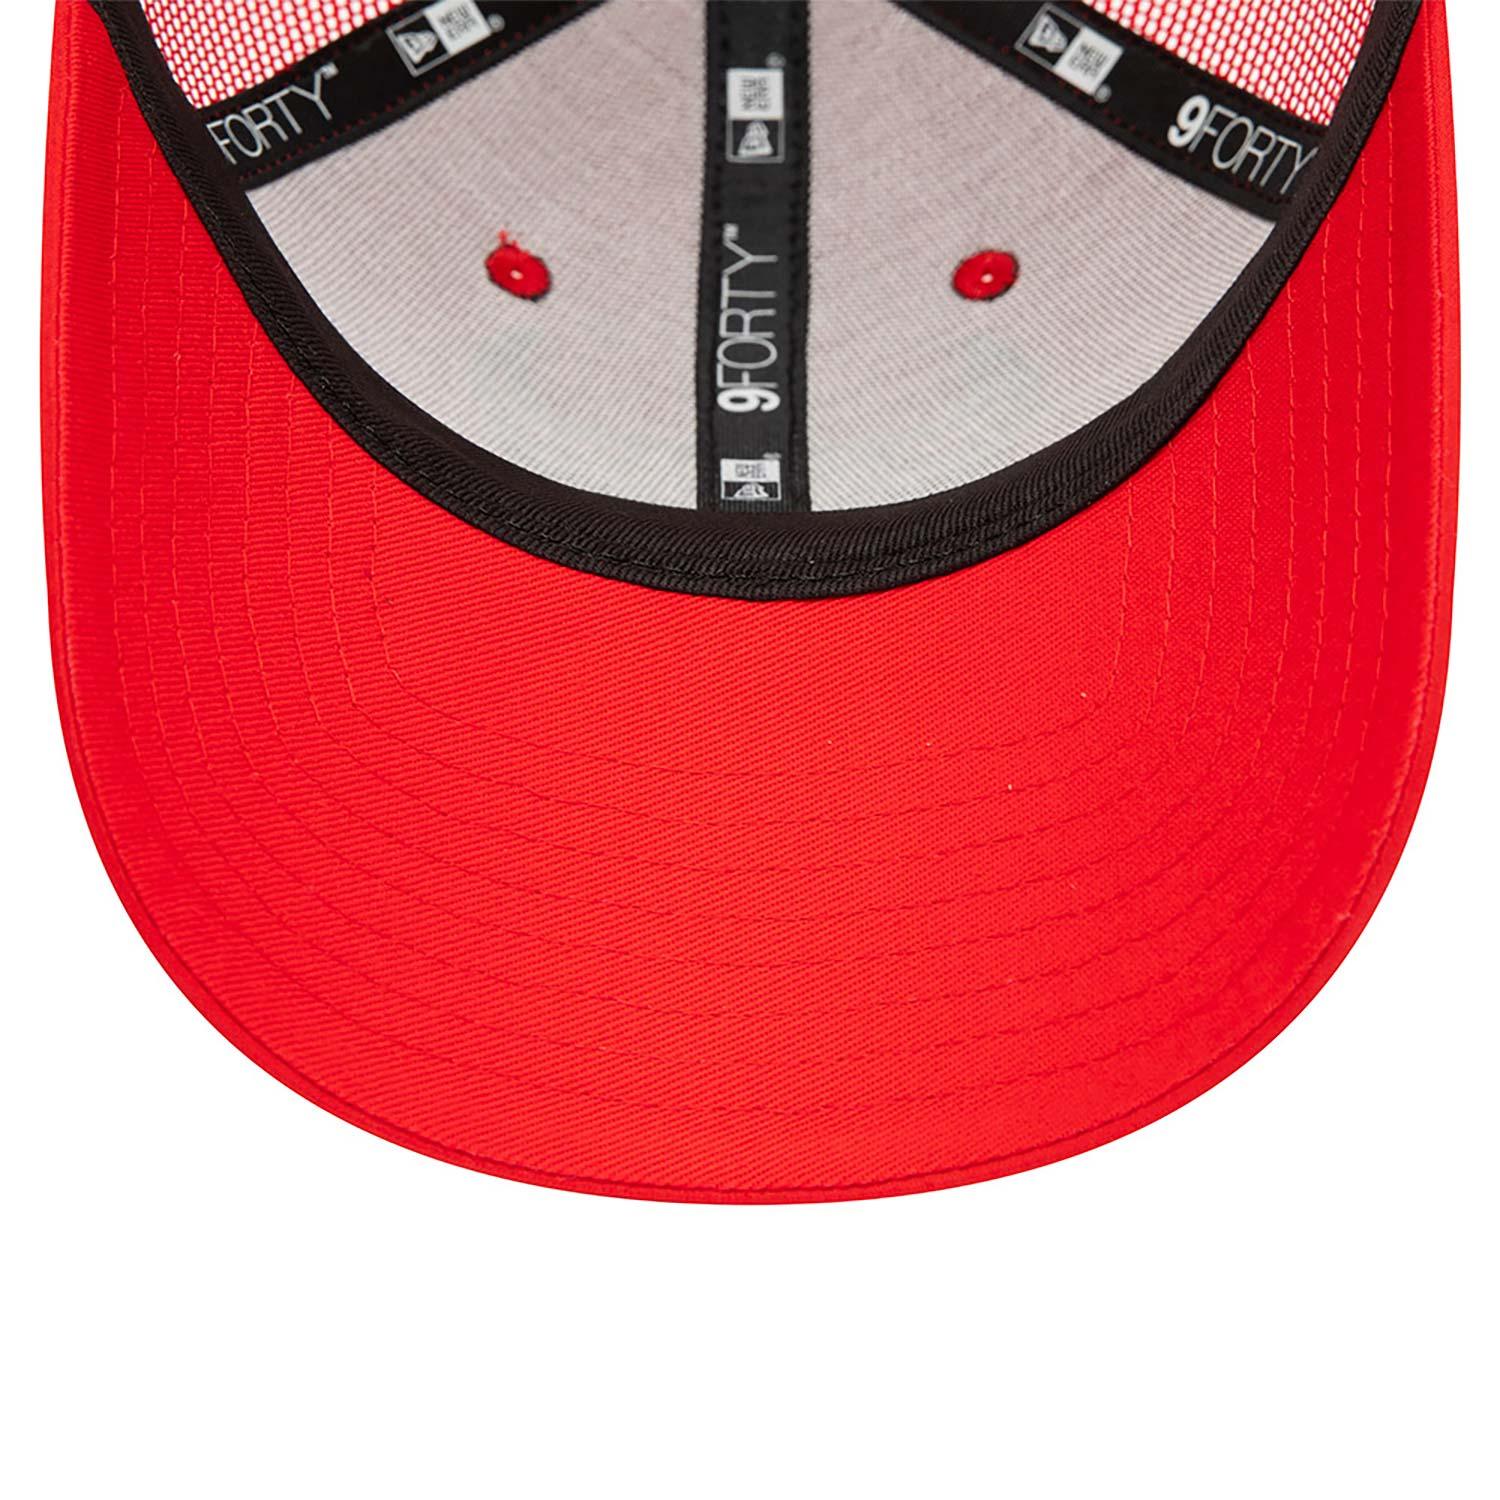 NEW ERA 9FORTY CHICAGO BULLS HOME FIELD RED CAP - FAM